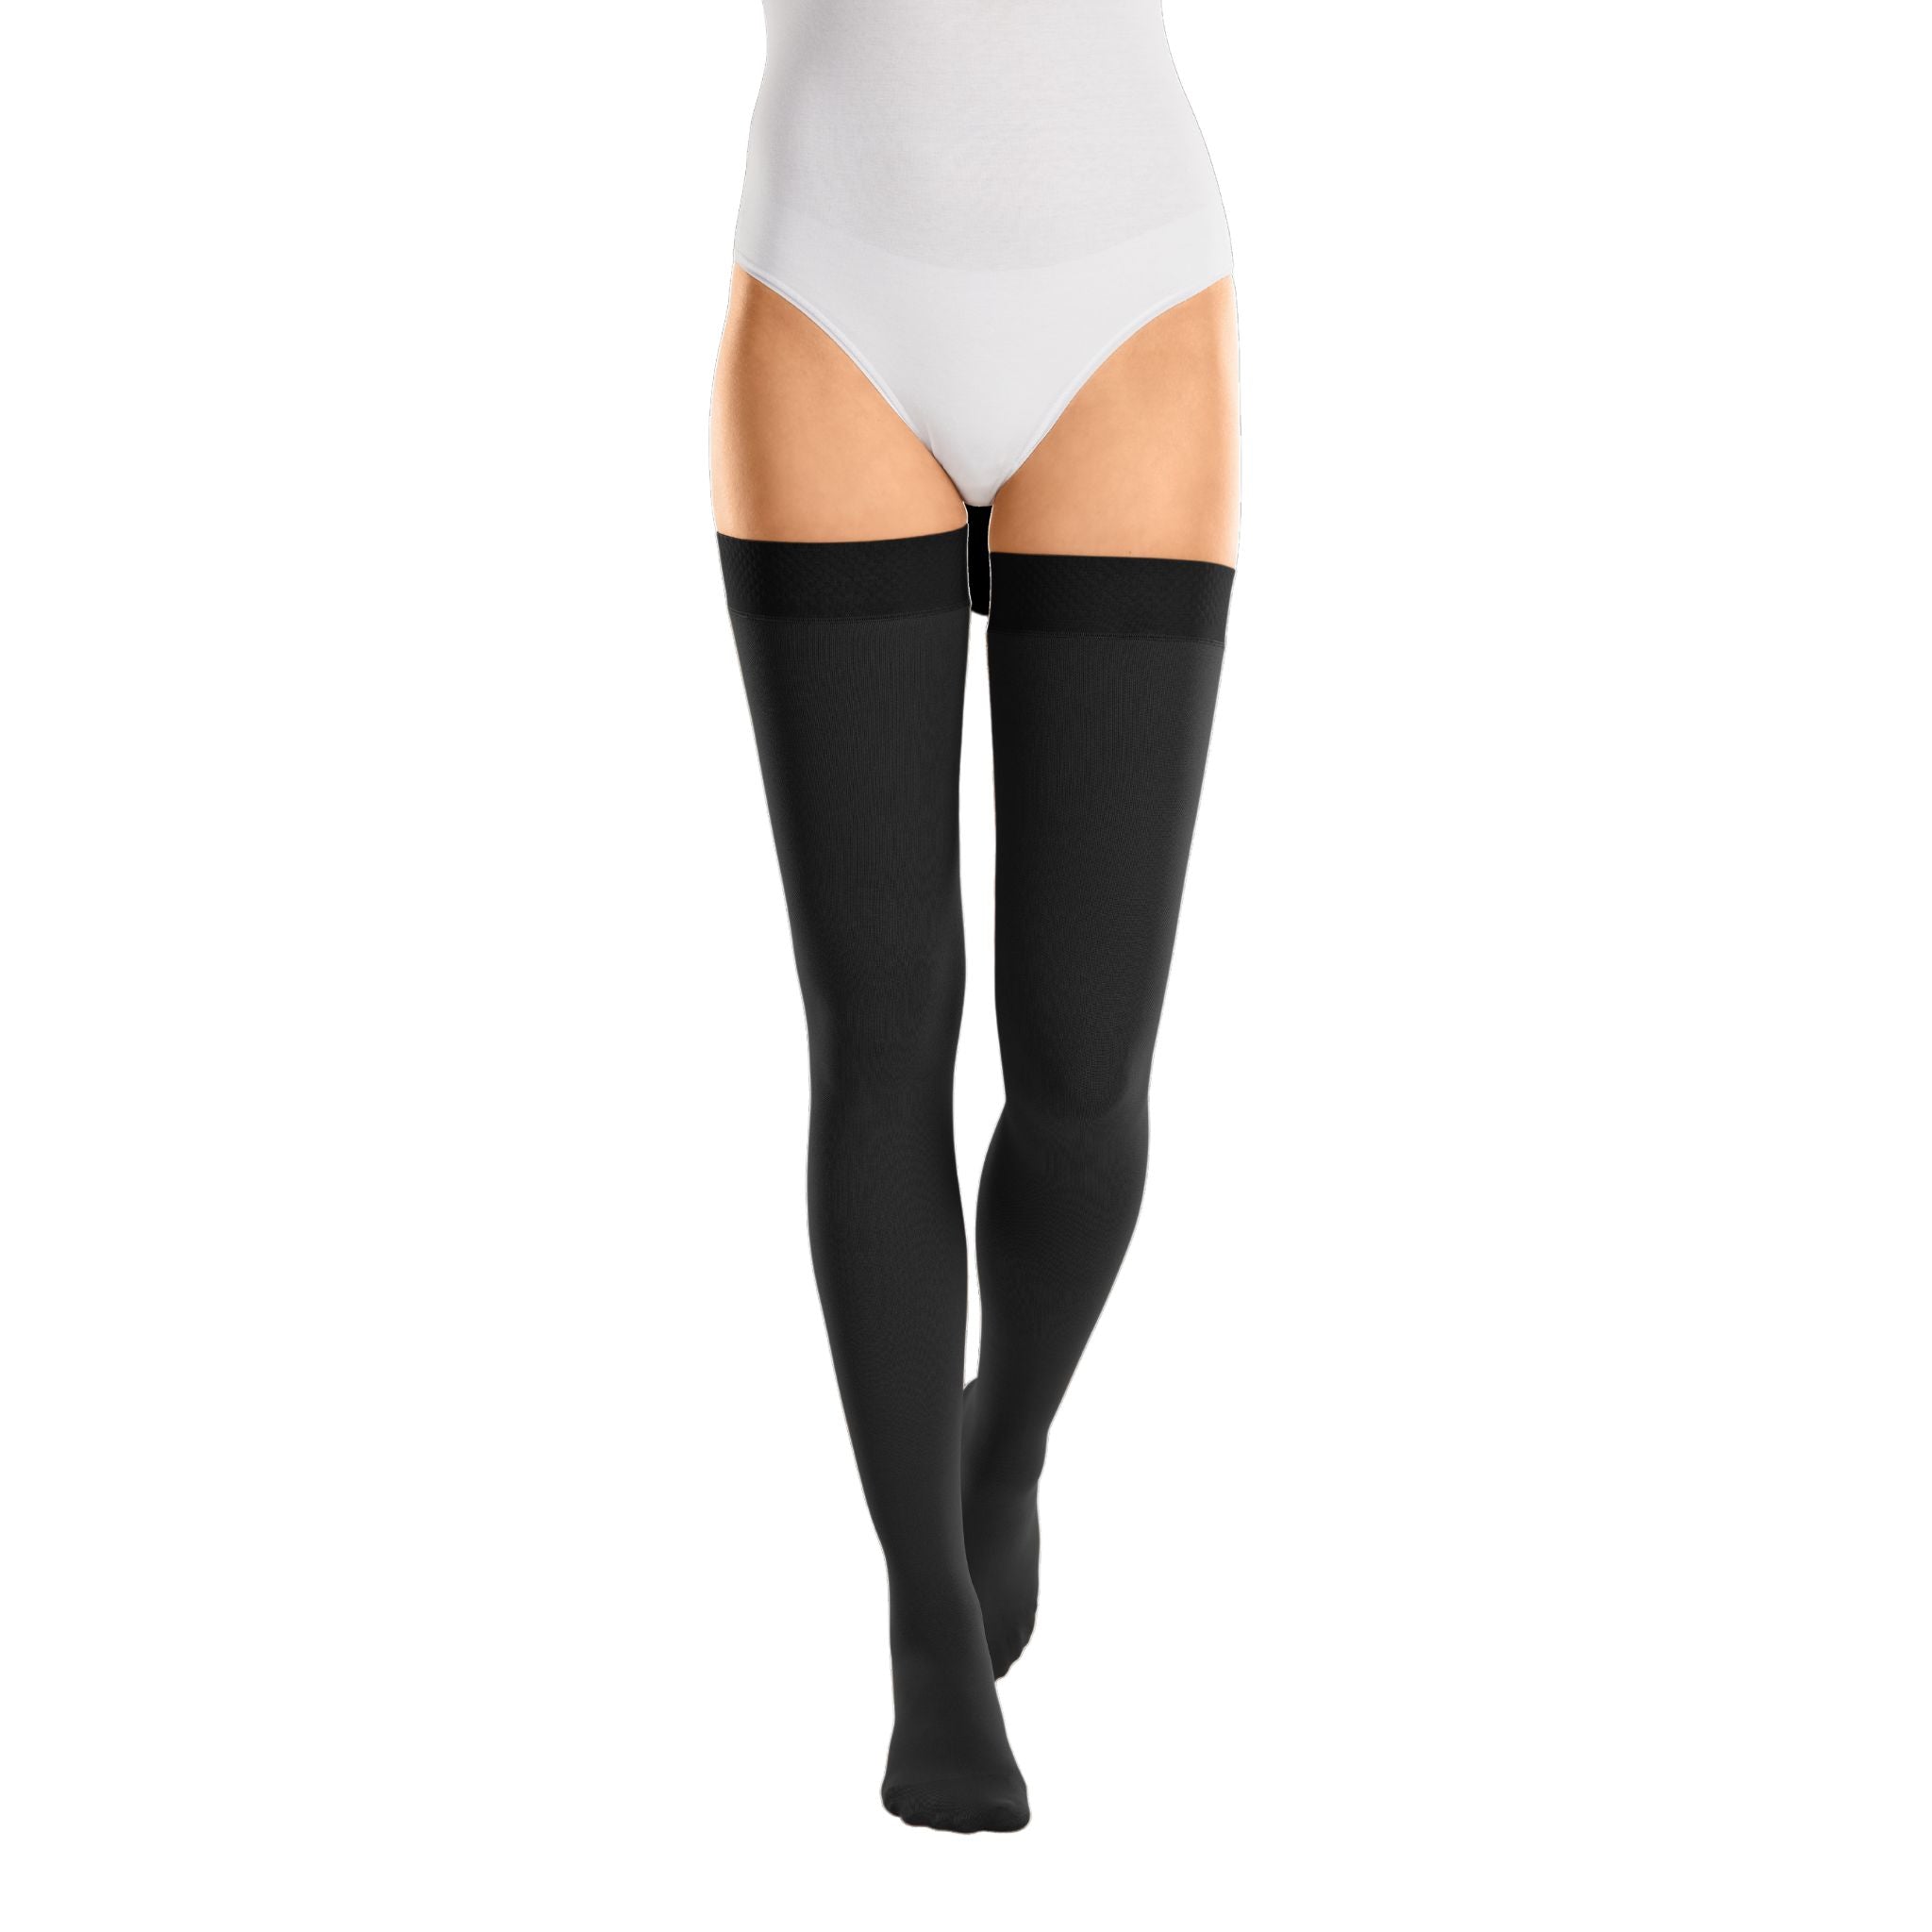 Compression Stockings | Thigh High | Closed Toe | Silicone Topband Wide | Black | mediven cotton